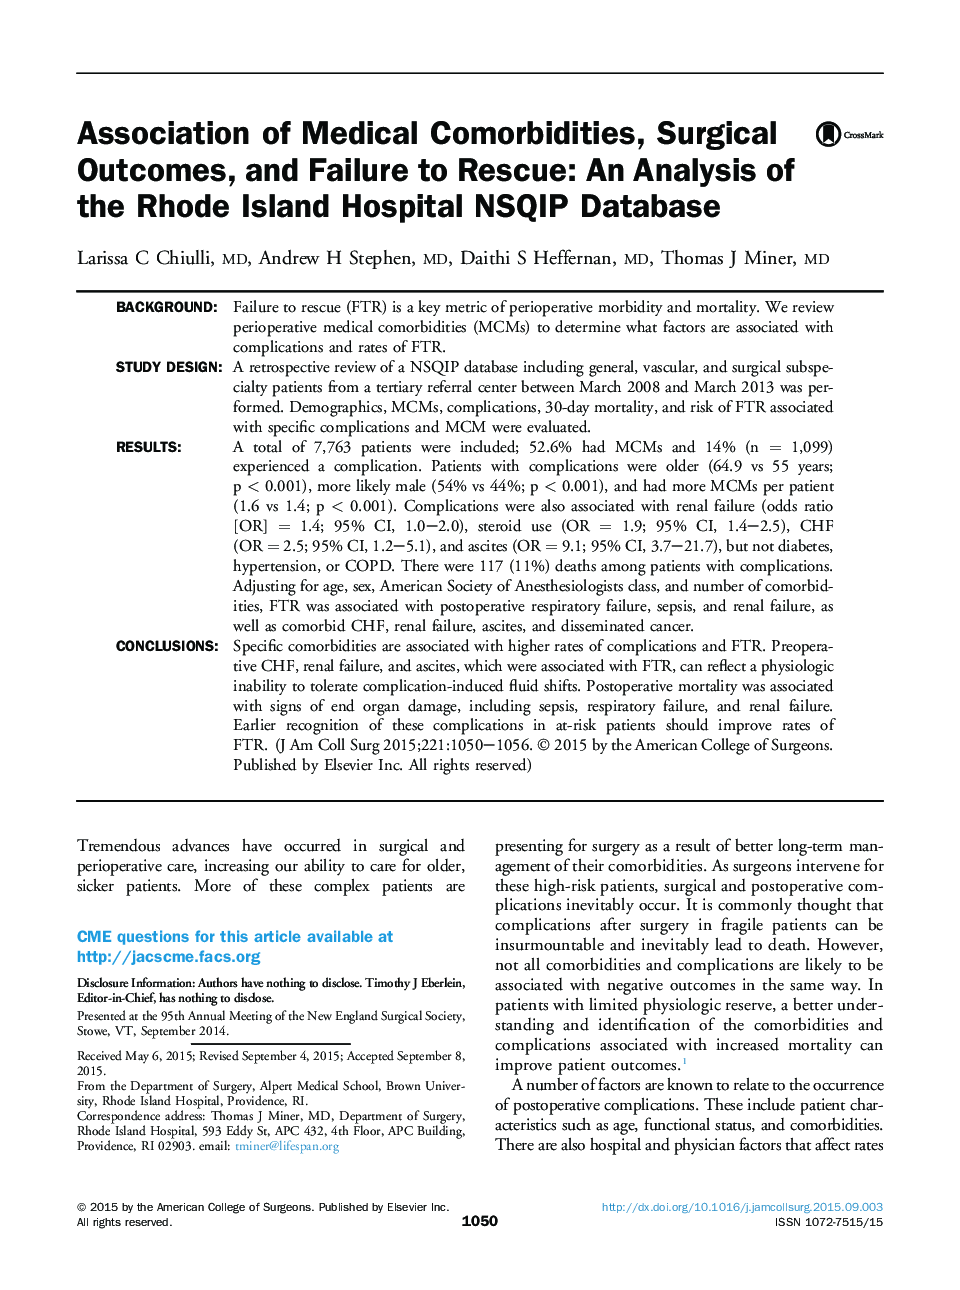 Association of Medical Comorbidities, Surgical Outcomes, and Failure to Rescue: An Analysis of the Rhode Island Hospital NSQIP Database 